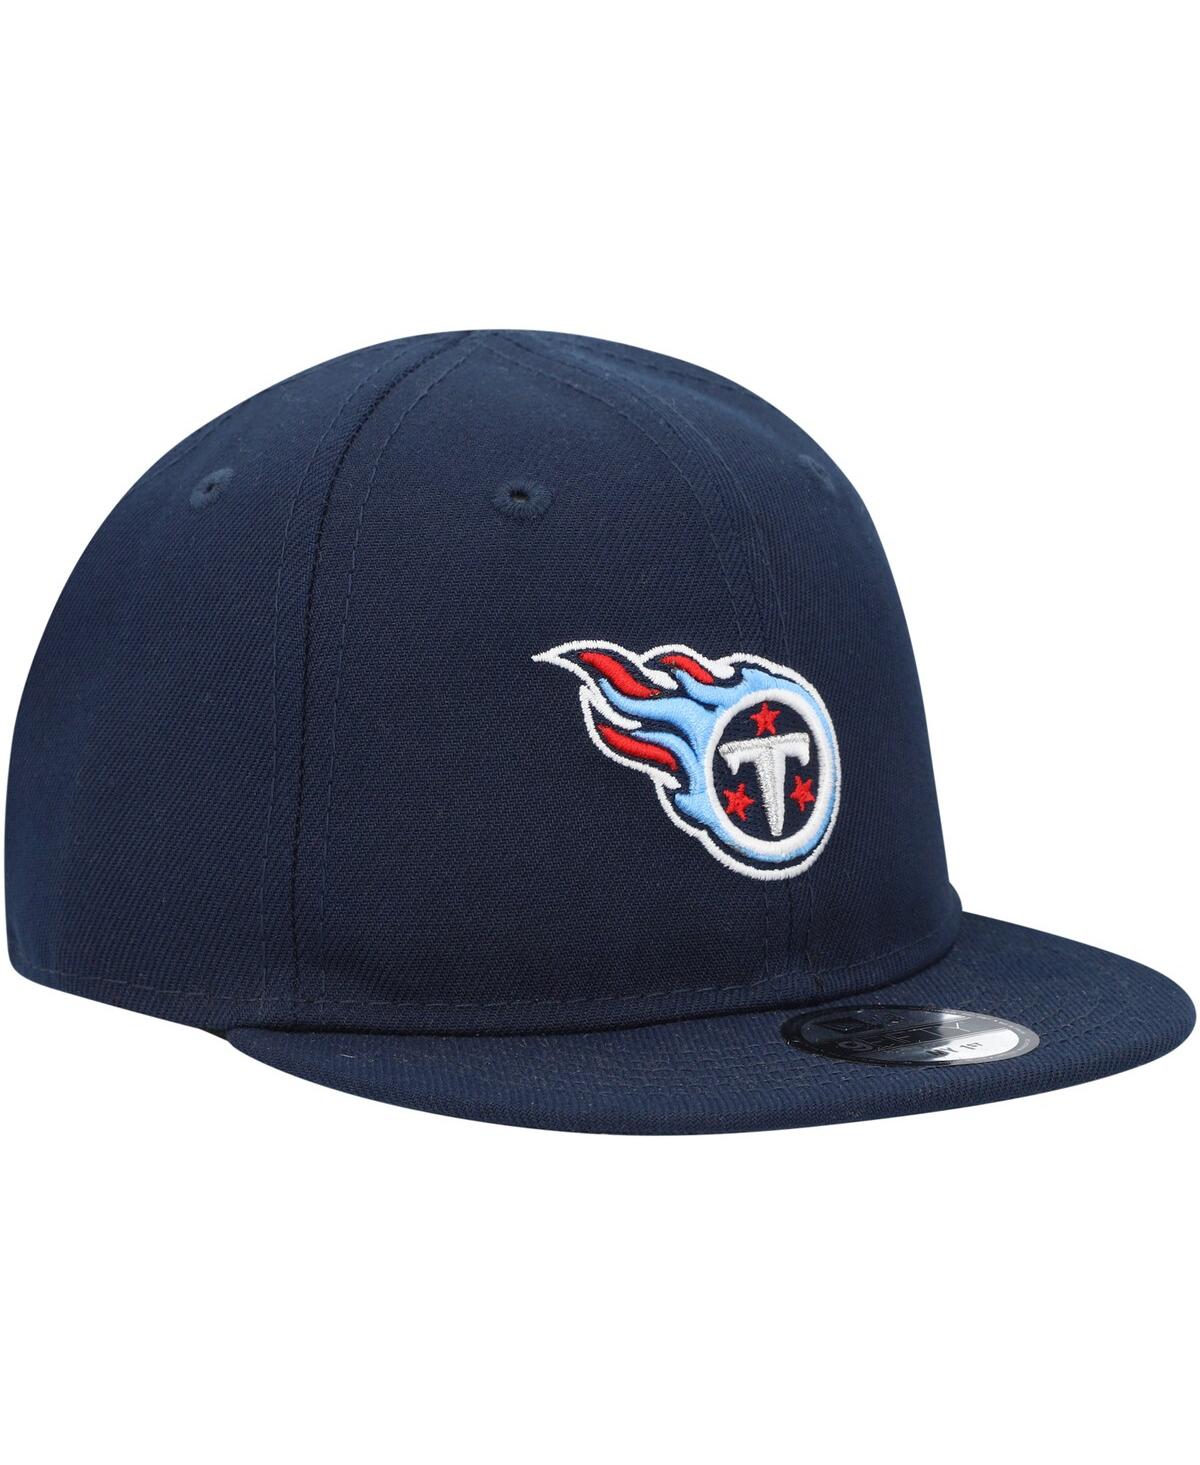 Shop New Era Baby Boys And Girls  Navy Tennessee Titans My 1st 9fifty Adjustable Hat